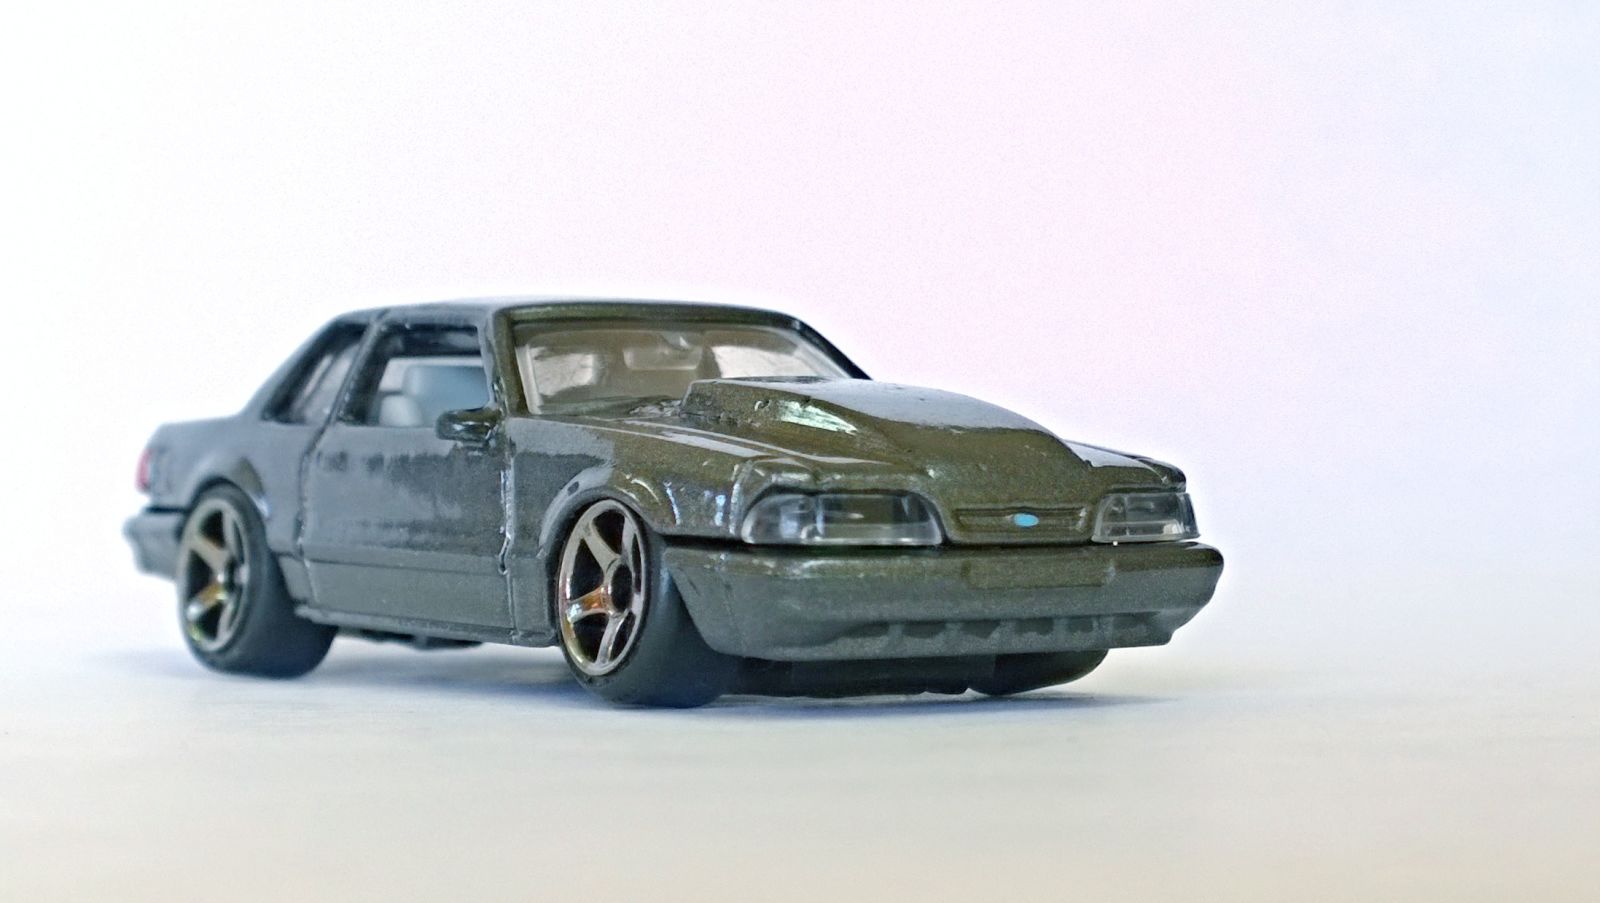 Illustration for article titled CUSTOM 1993 Mustang SSP Coupe - now with IRS!